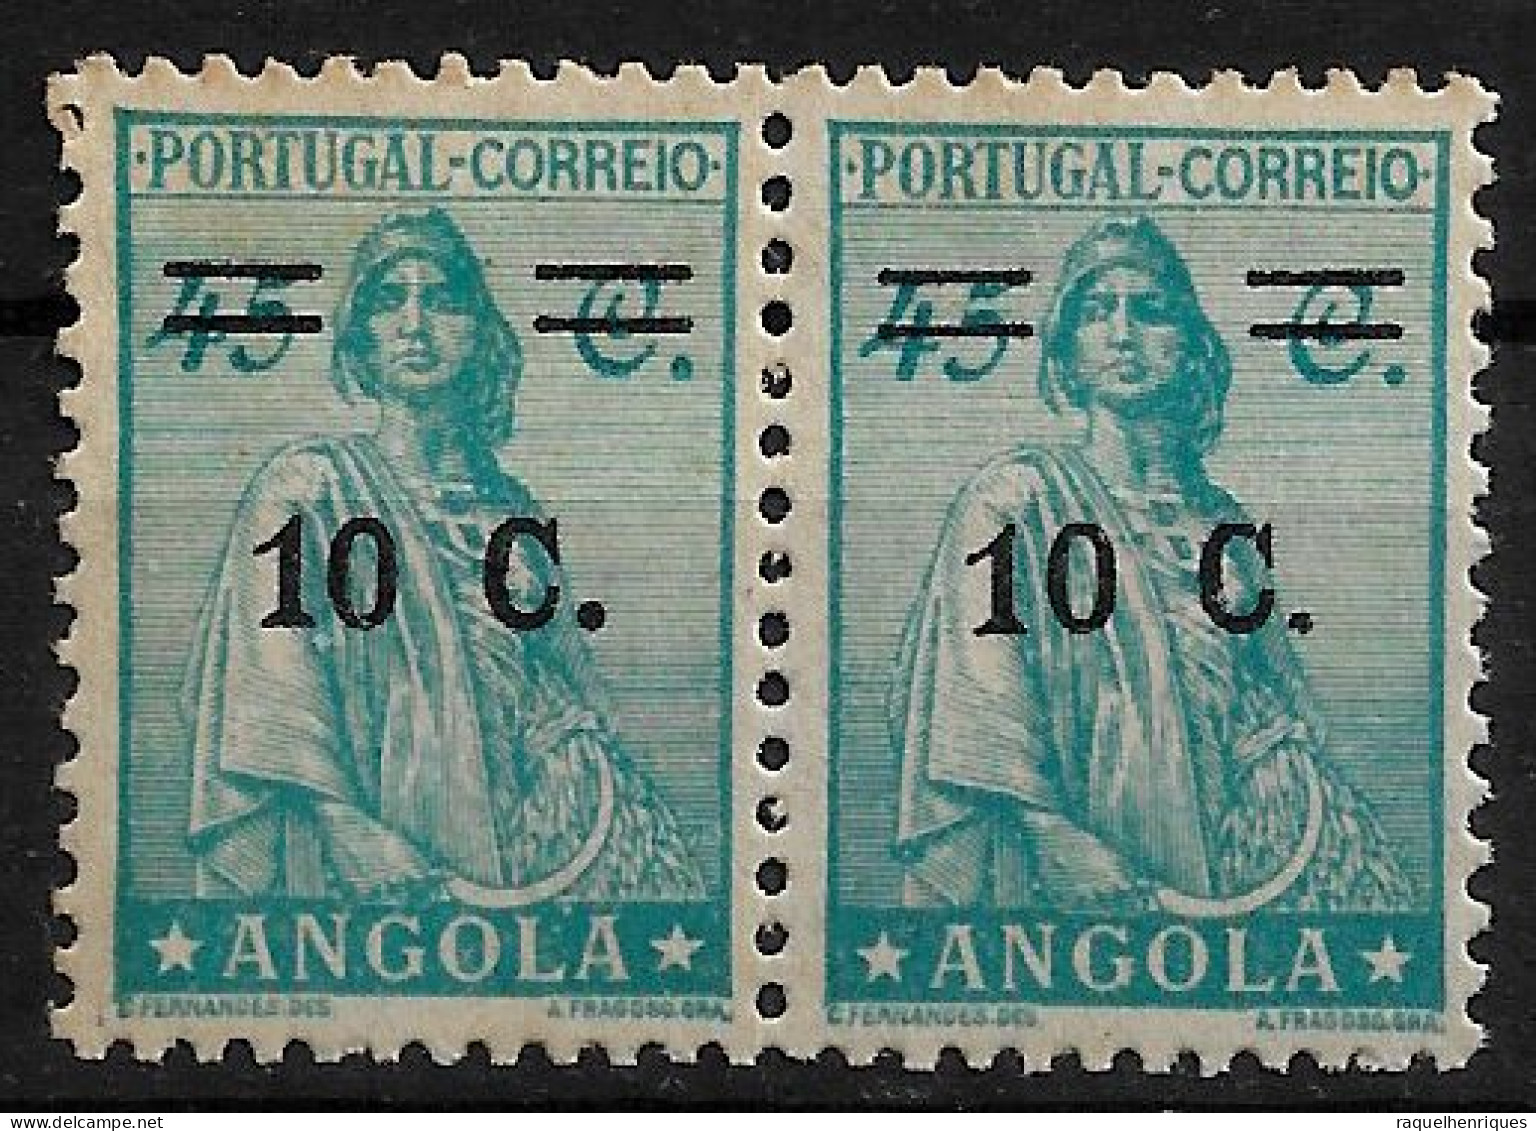 ANGOLA 1934 ISSUE OF 1932 SURCHARGED 10/45 - PAIR MNH (NP#71-P04-L3) - Angola